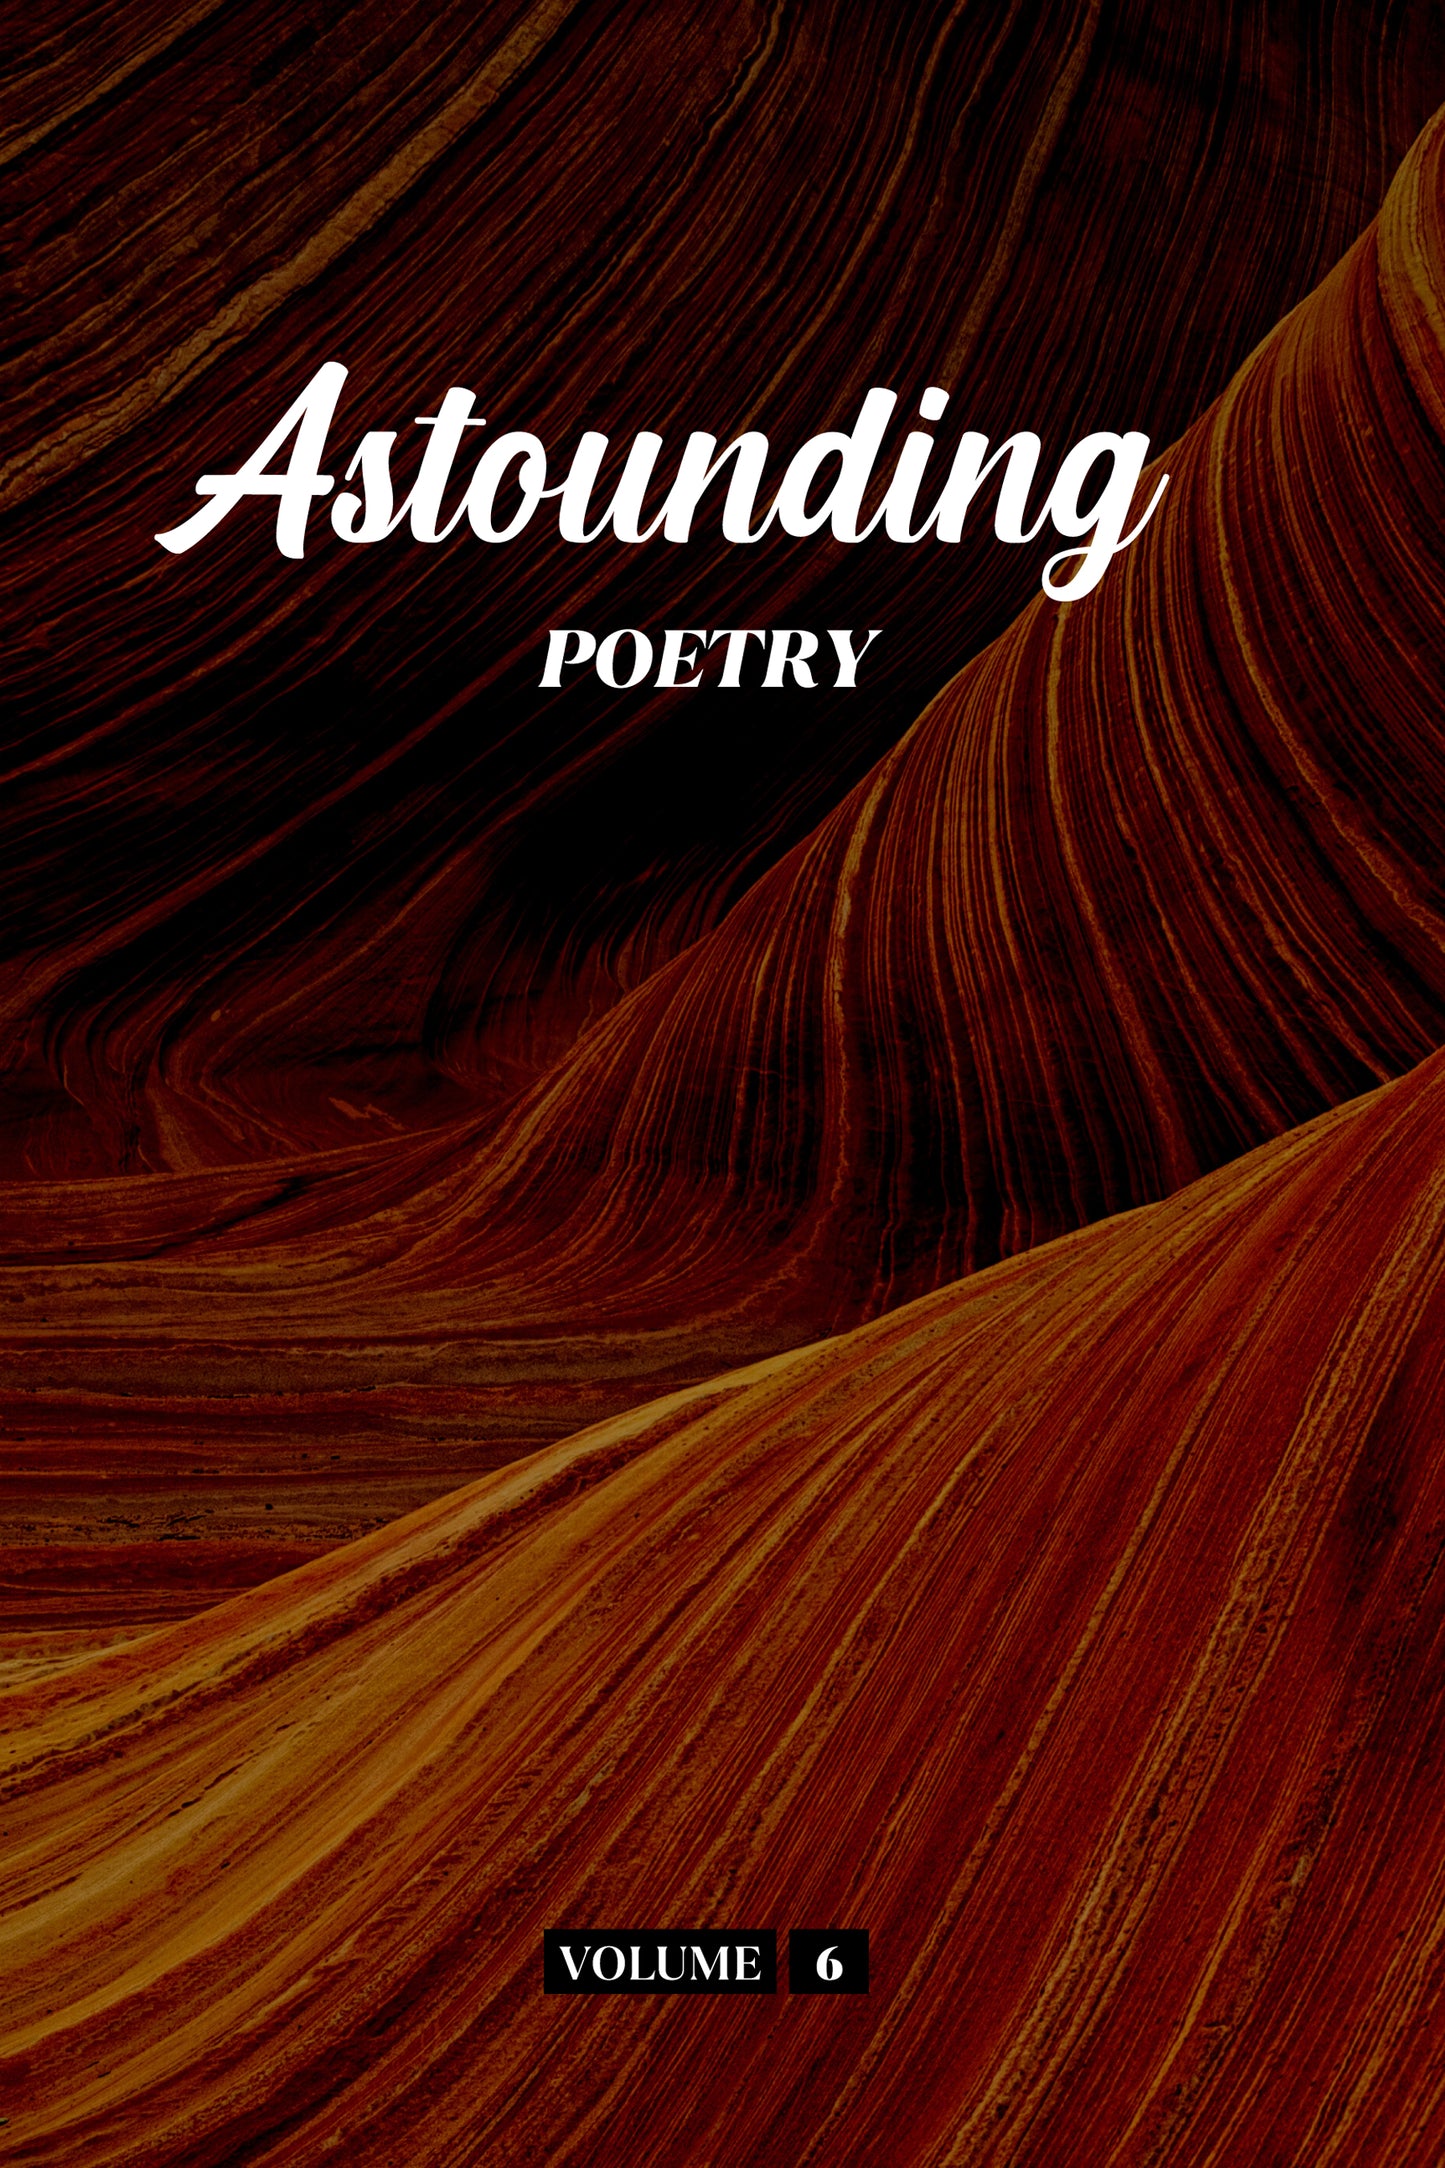 Astounding Poetry (Volume 6) - Physical Book